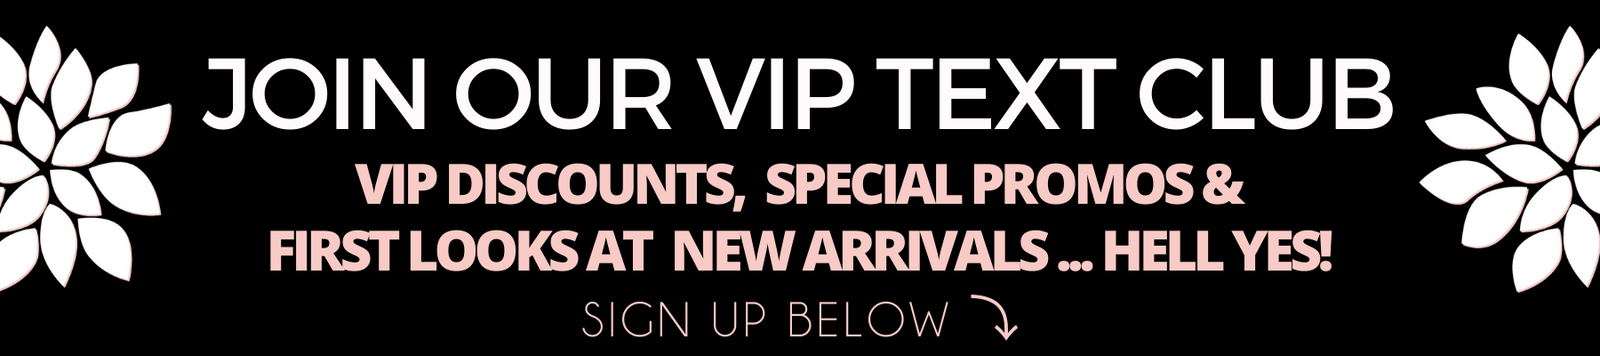 Sign Up for Our VIP Text Club